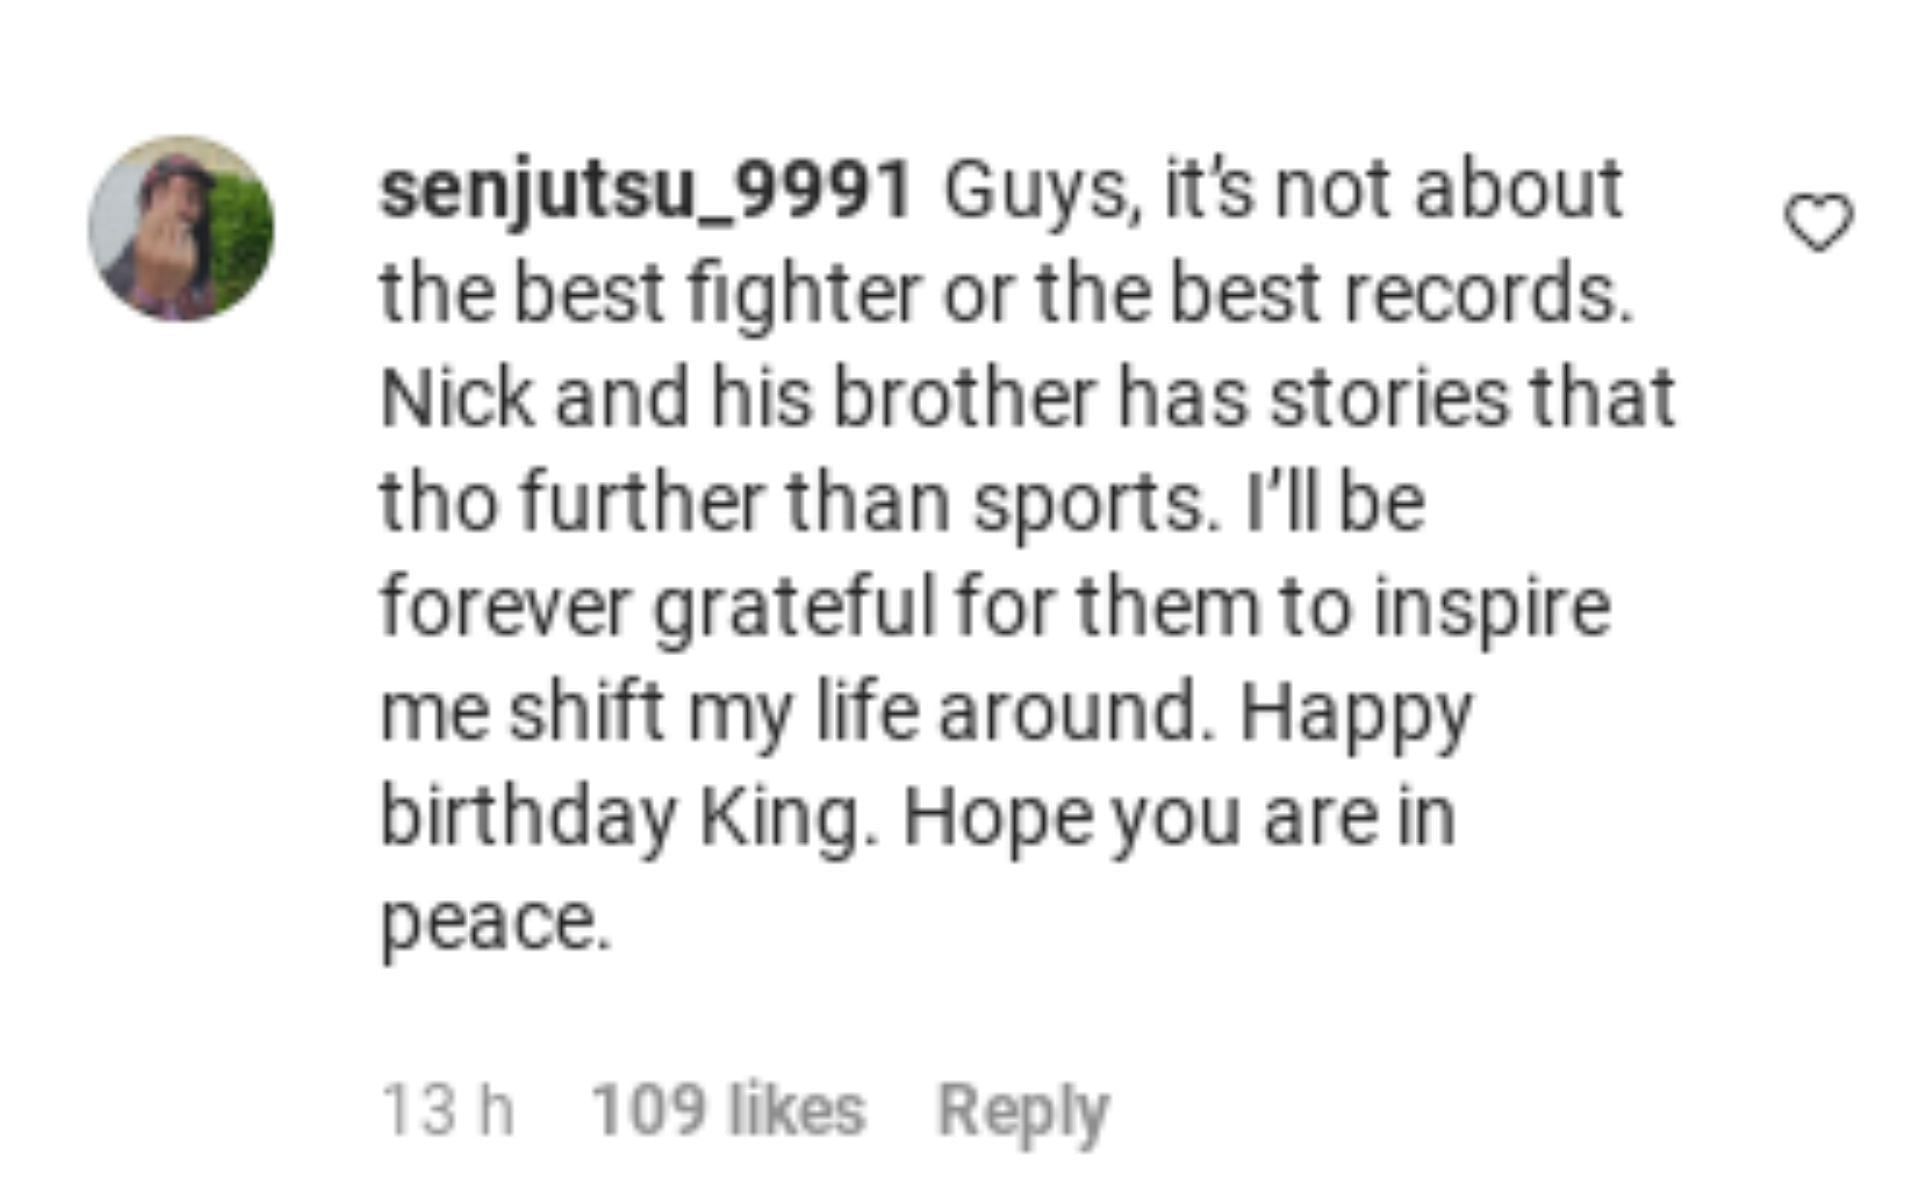 A fan thanking the Diaz brothers